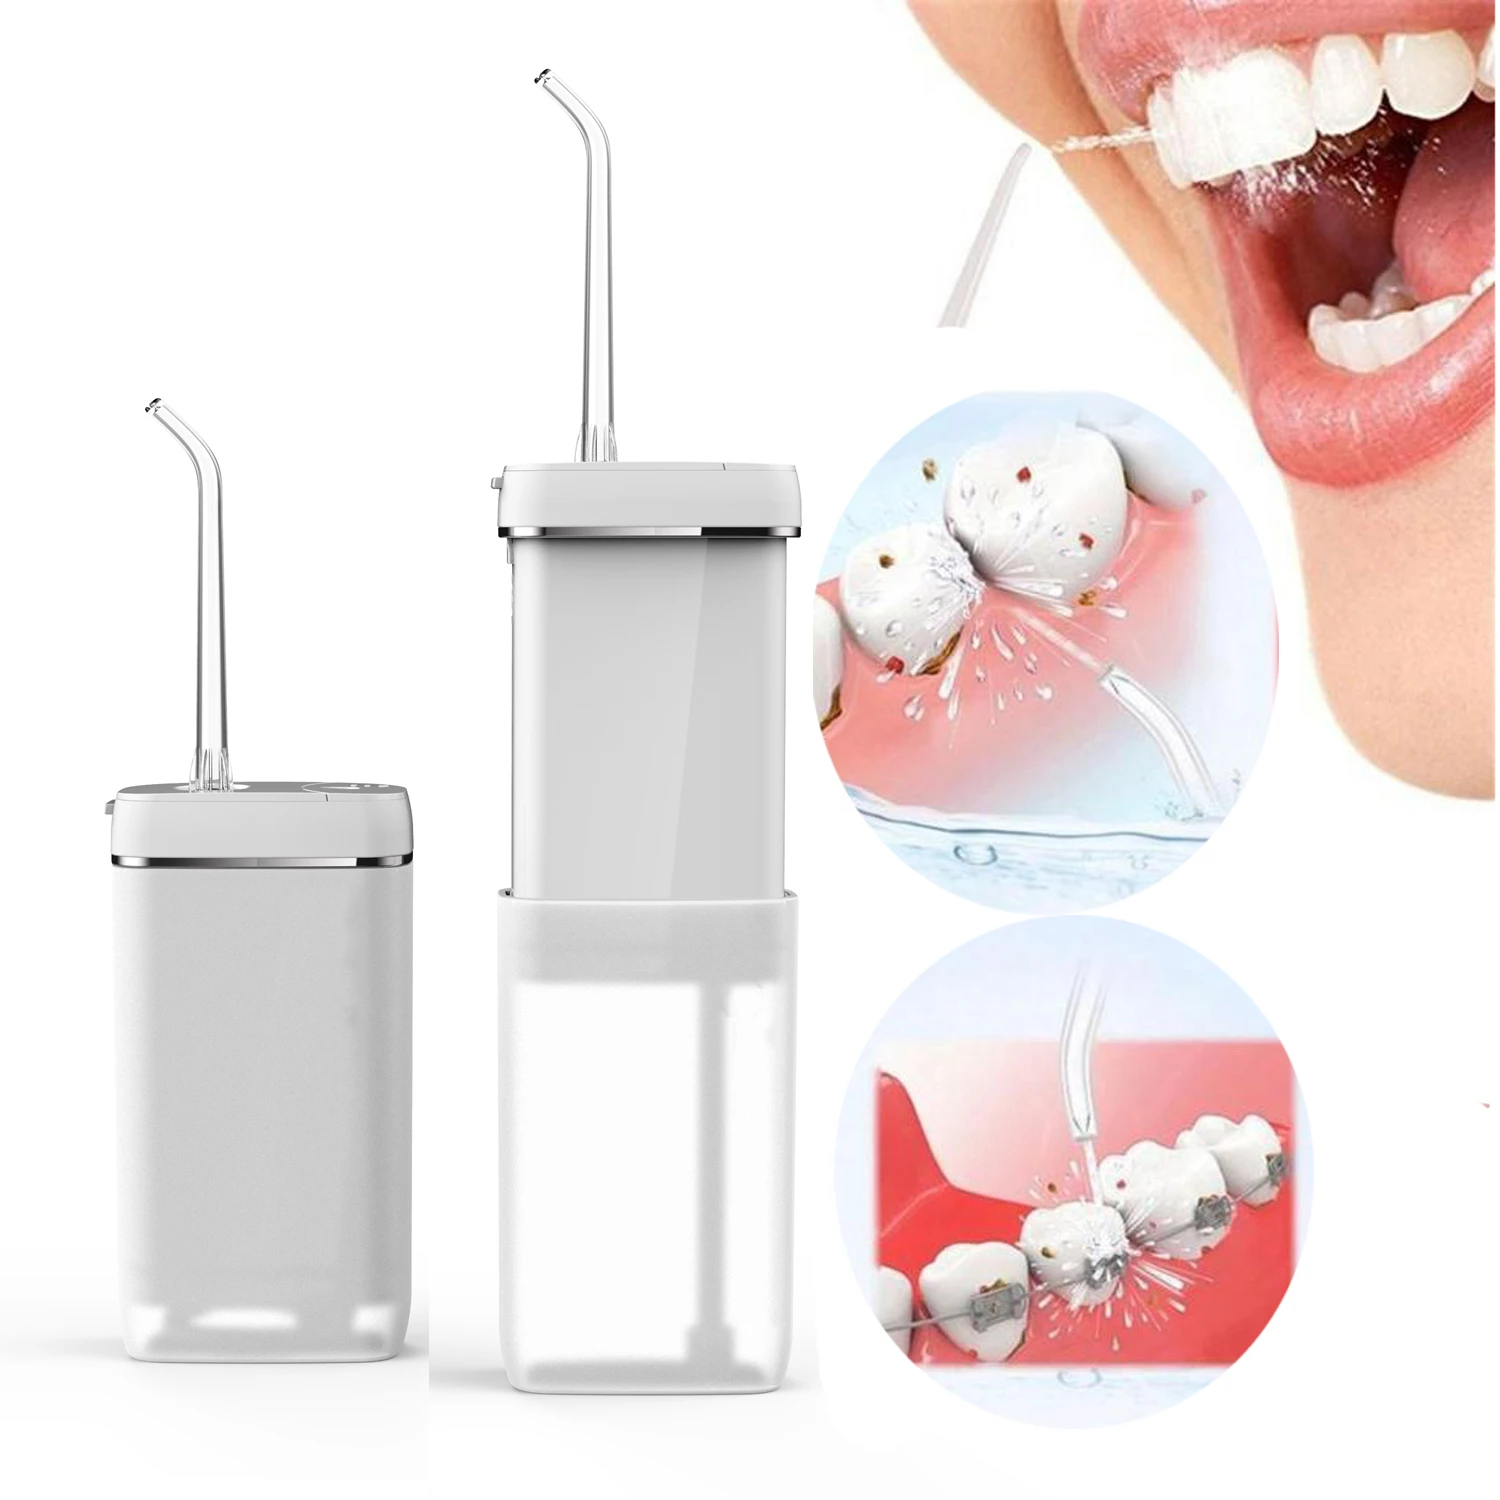 

Cordless Electric Oral Irrigator Dental For Teeth Whitening Toothbrush With Cordless Price In Pakistan Ipx8 Water Flosser, White/pink/blue